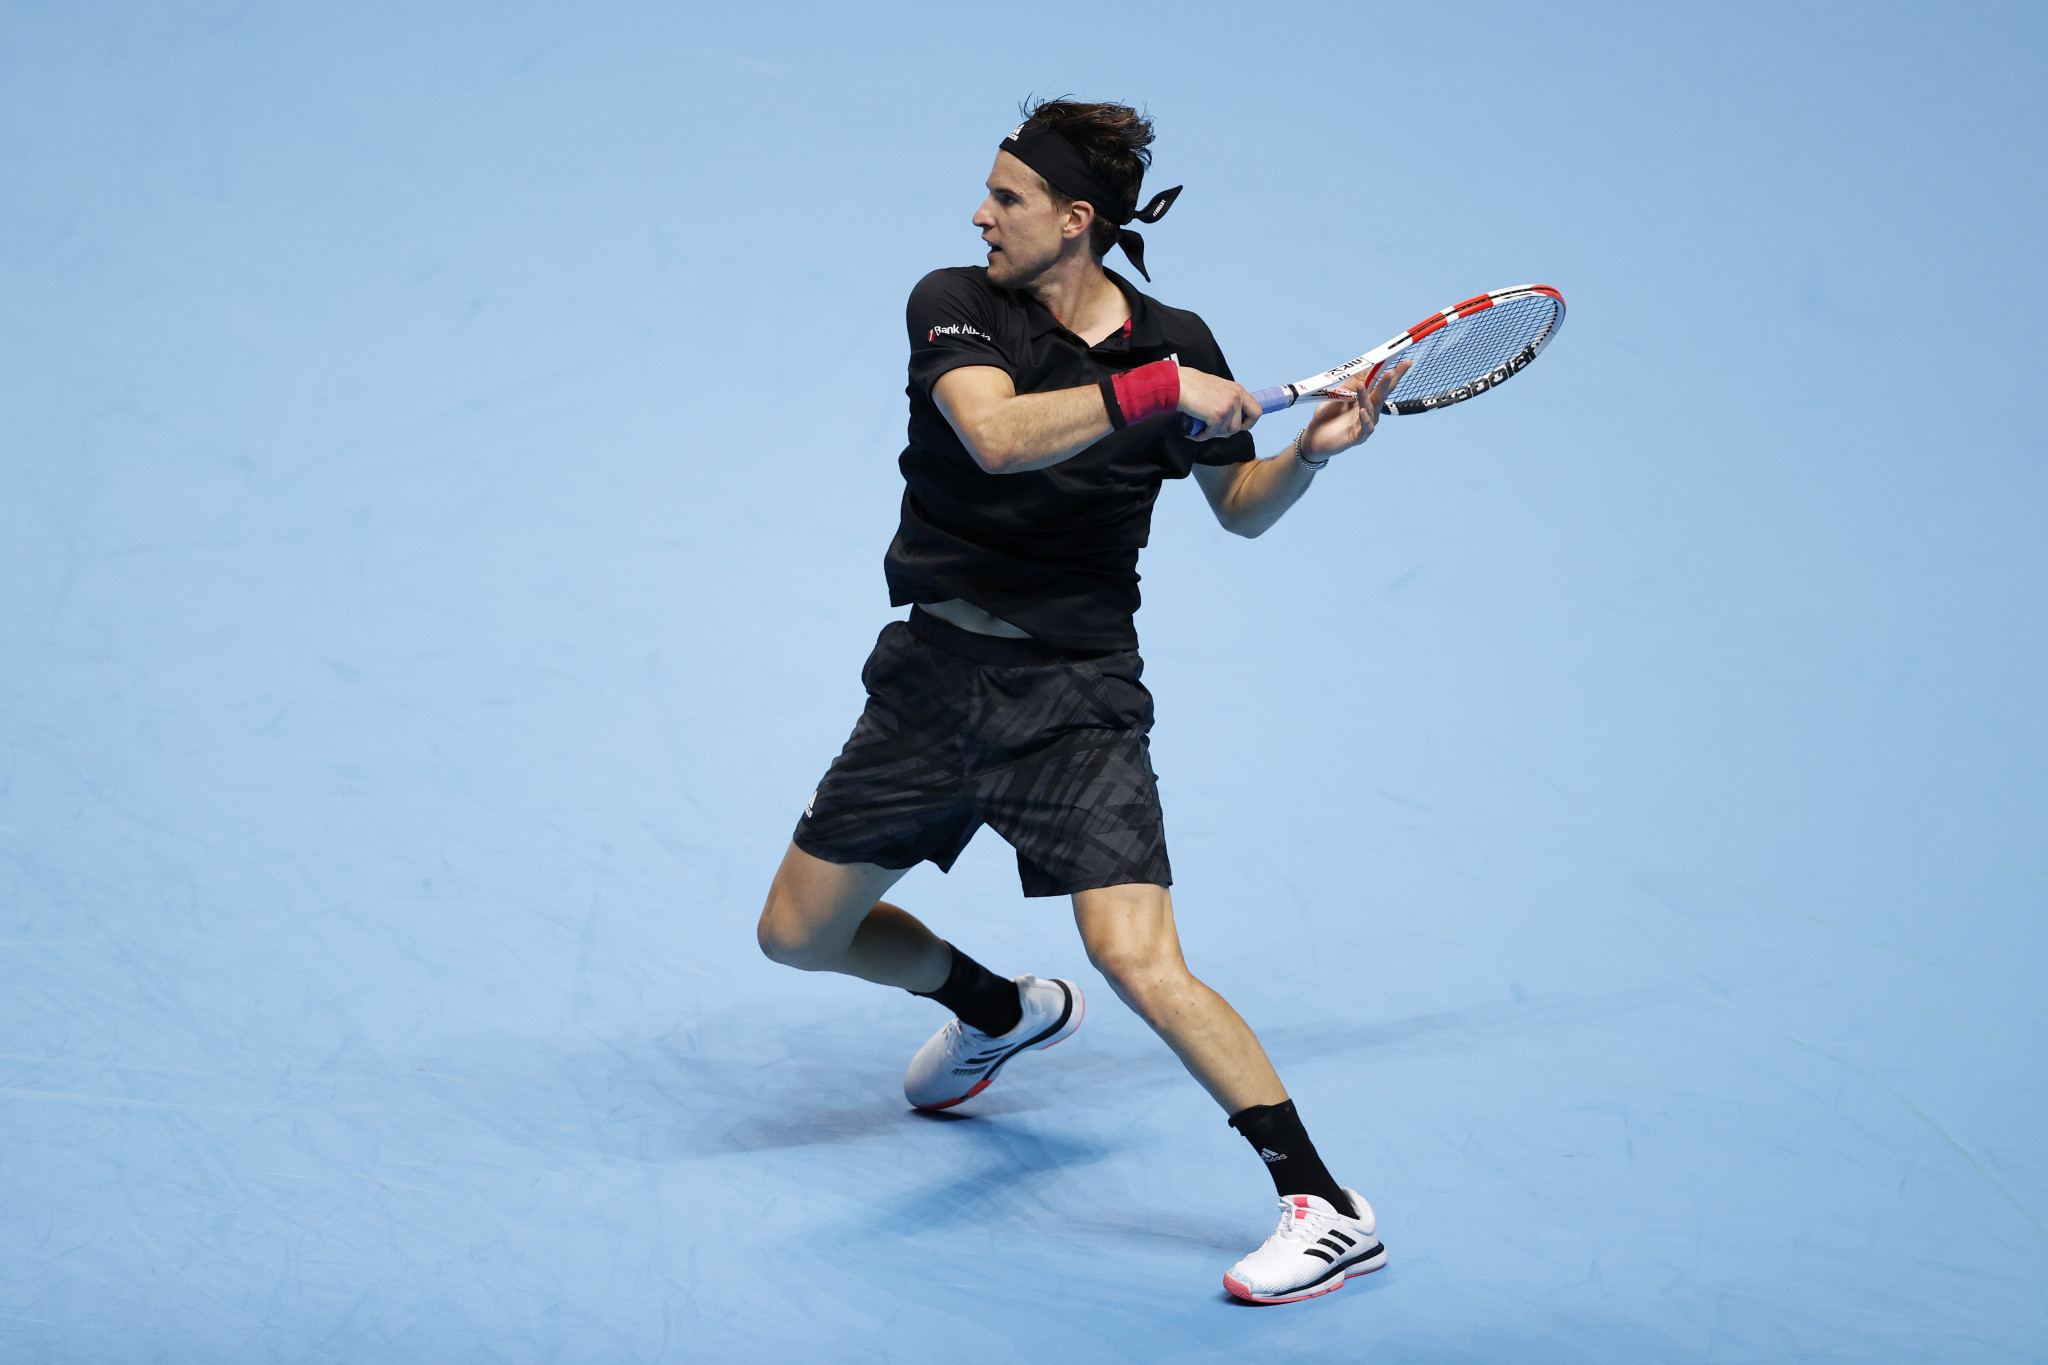 Dramatic day at ATP Finals as Thiem beats Nadal and Tsitsipas wins match in deciding set tie-break